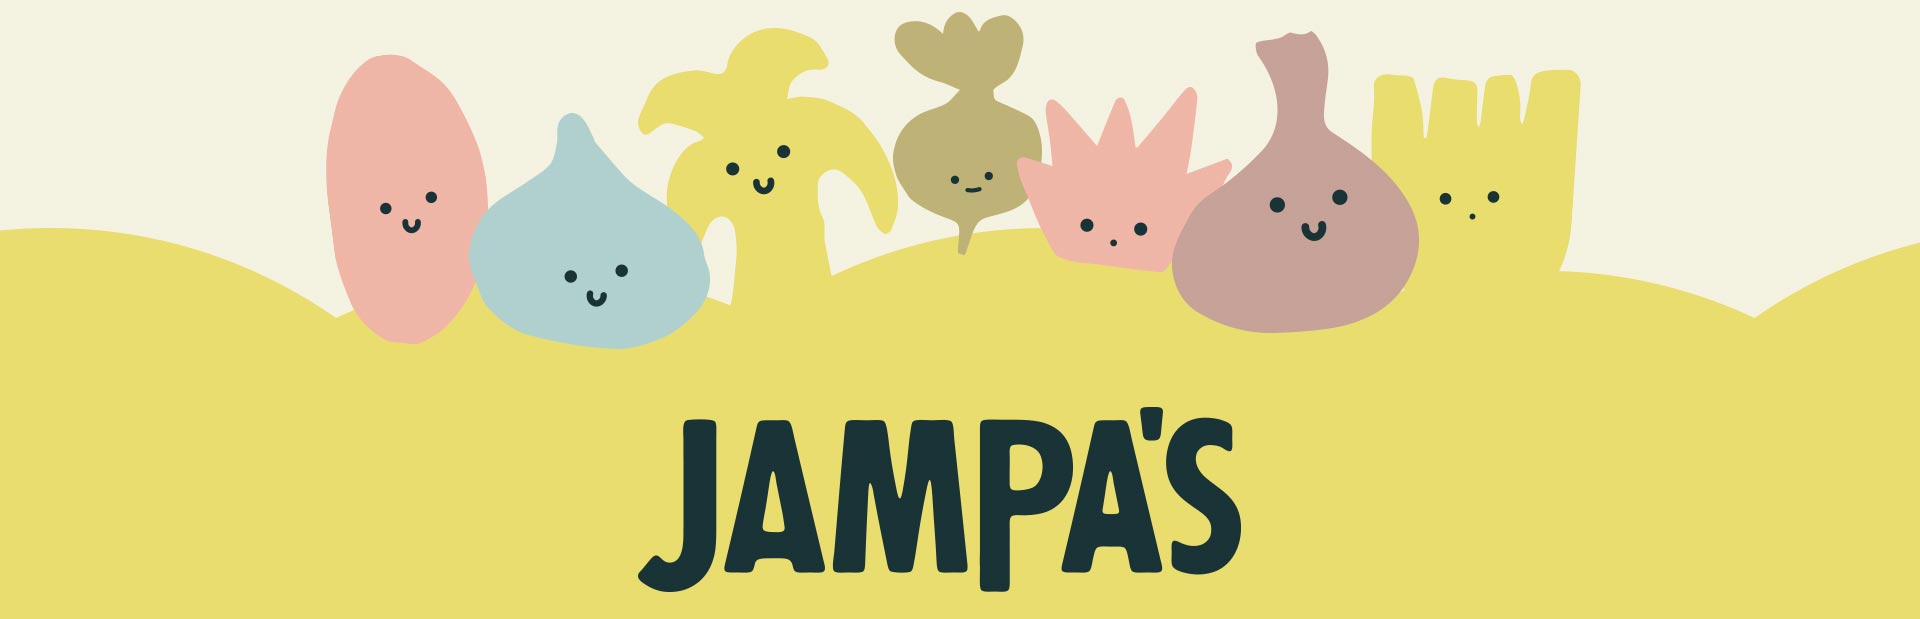 Jampa's Footer